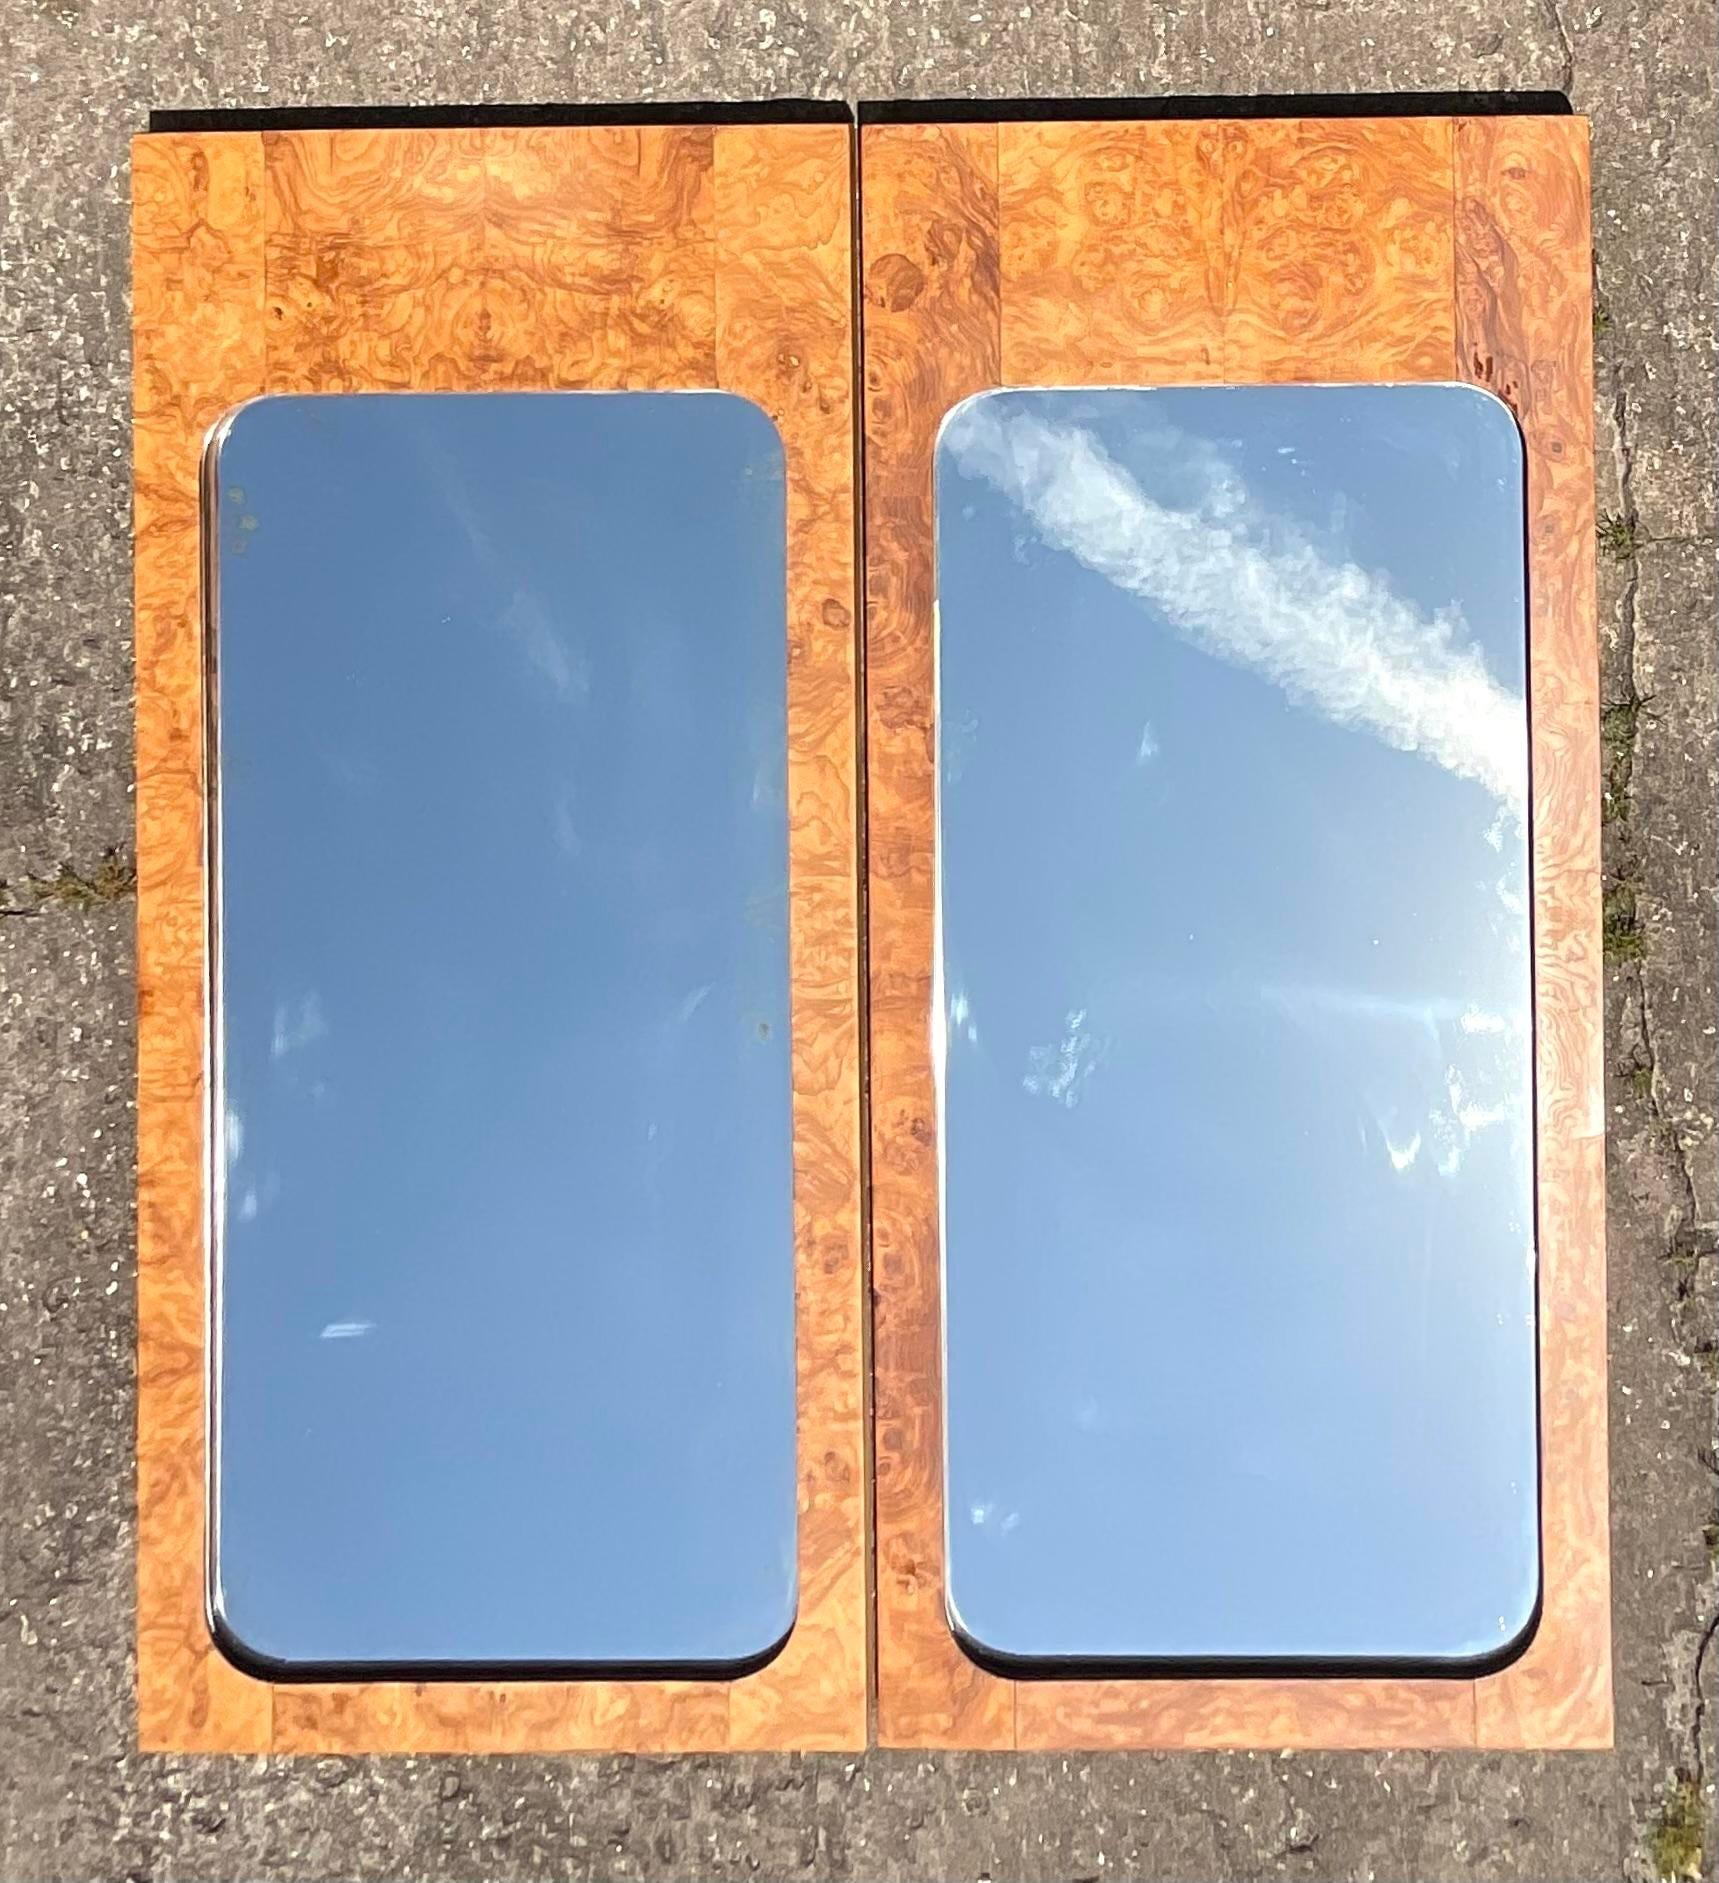 American Vintage Boho Burl Wood Mirrors - a Pair For Sale